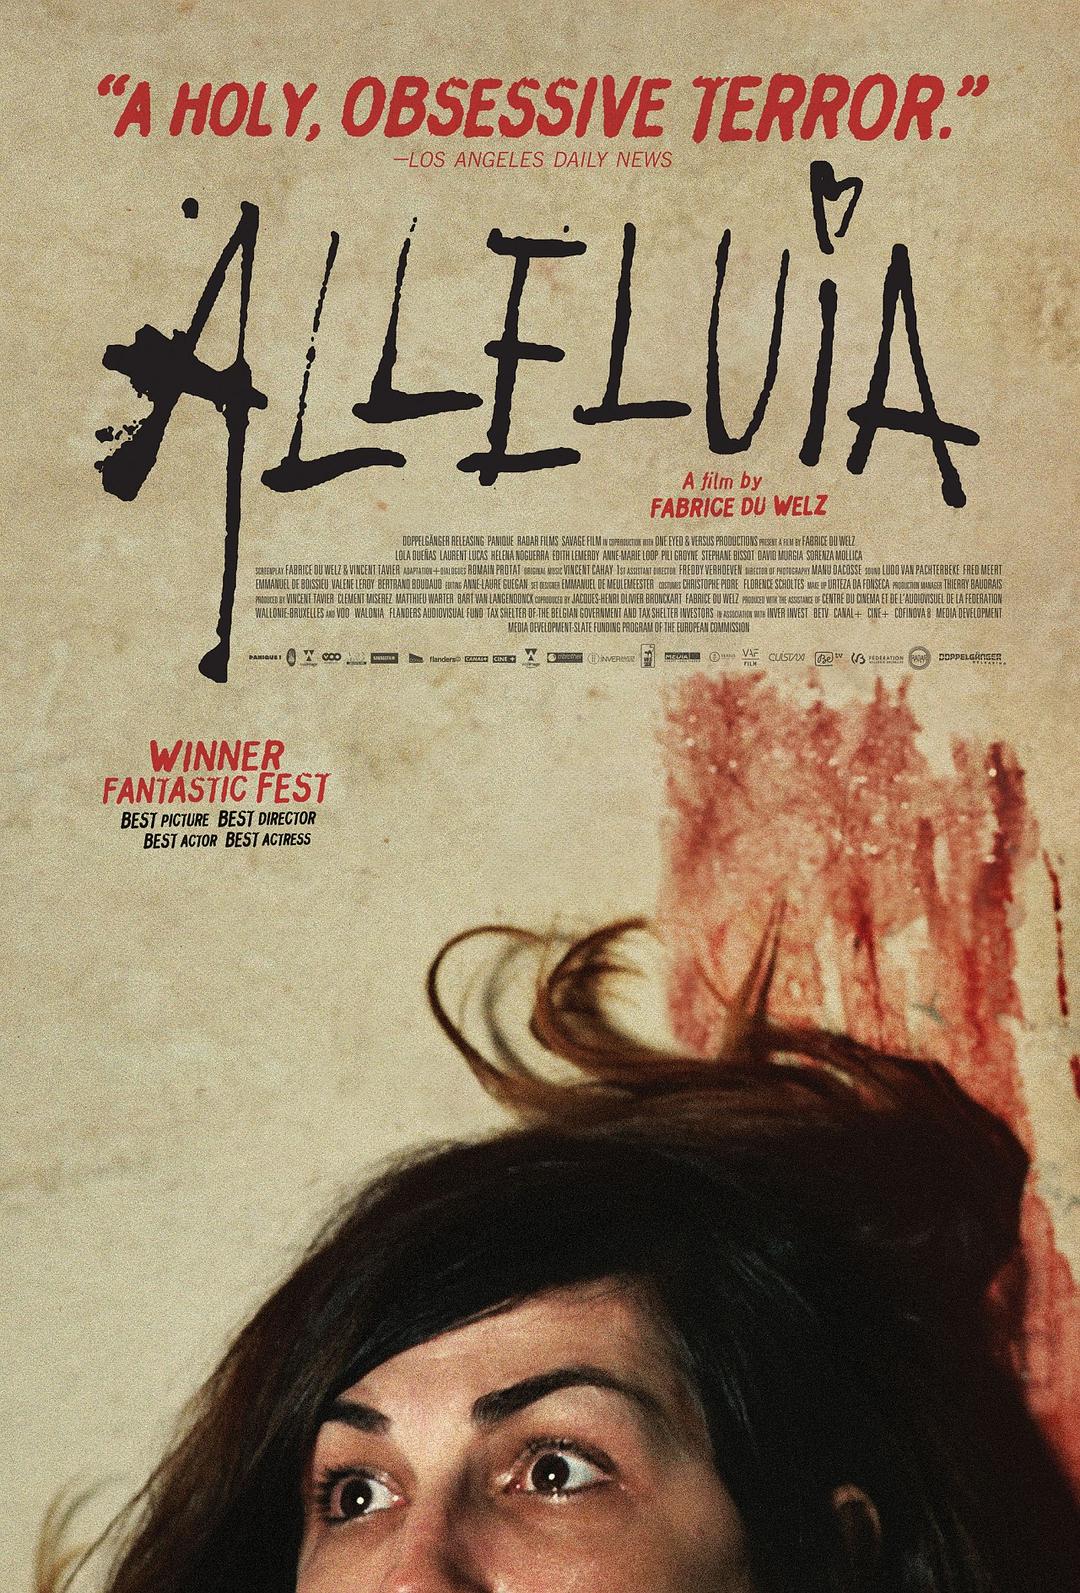 · Alleluia.2014.LIMITED.1080p.BluRay.x264-USURY 6.56GB-1.png